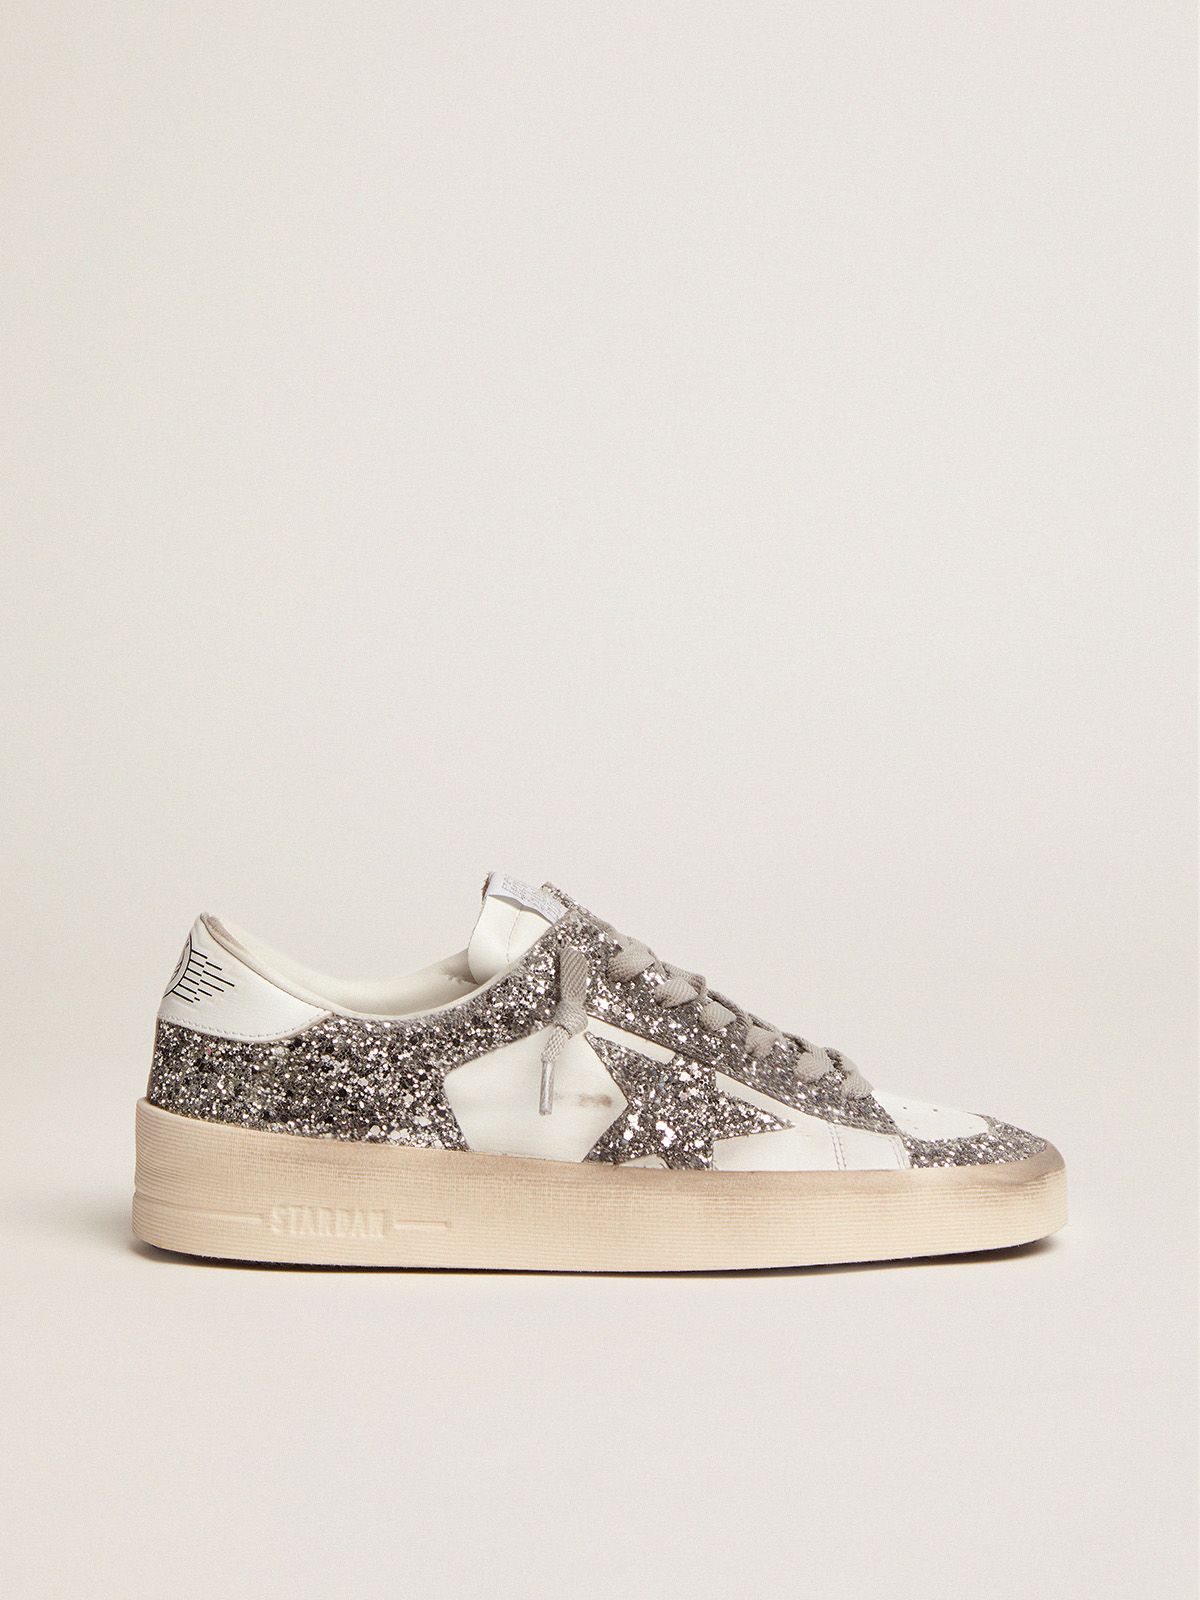 Stardan sneakers in white leather and silver glitter | 